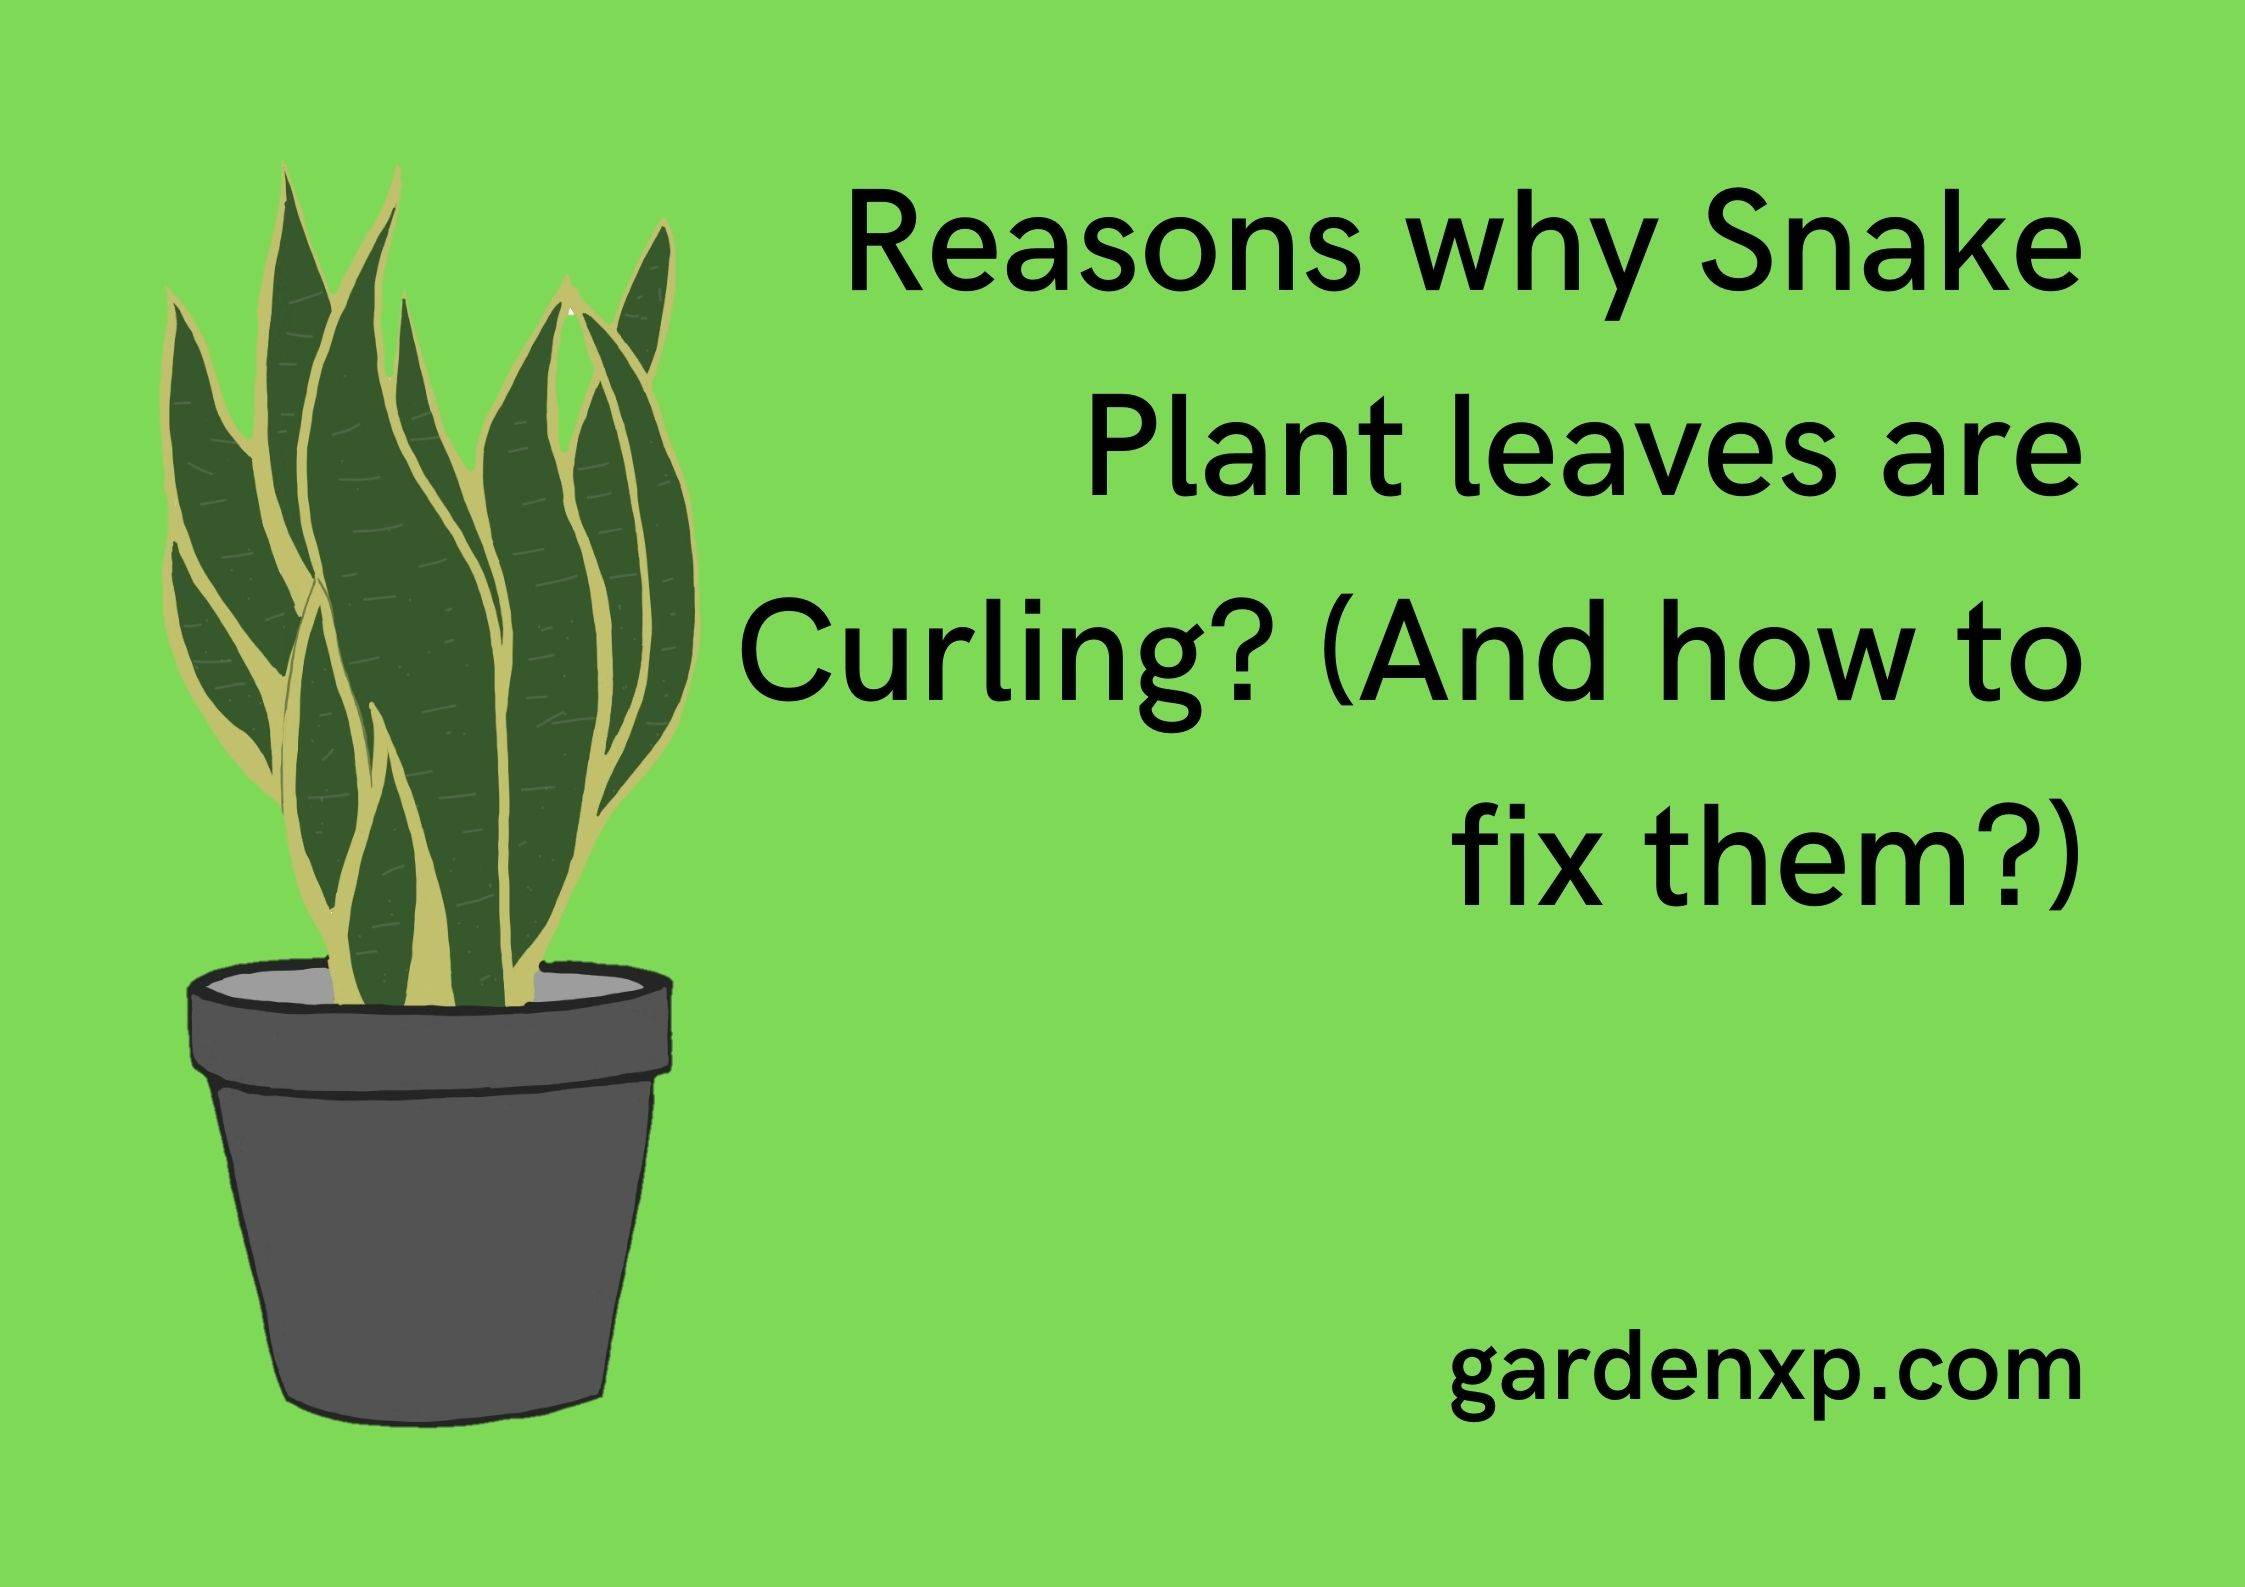 Reasons why Snake Plant leaves are Curling? (And how to fix them?)